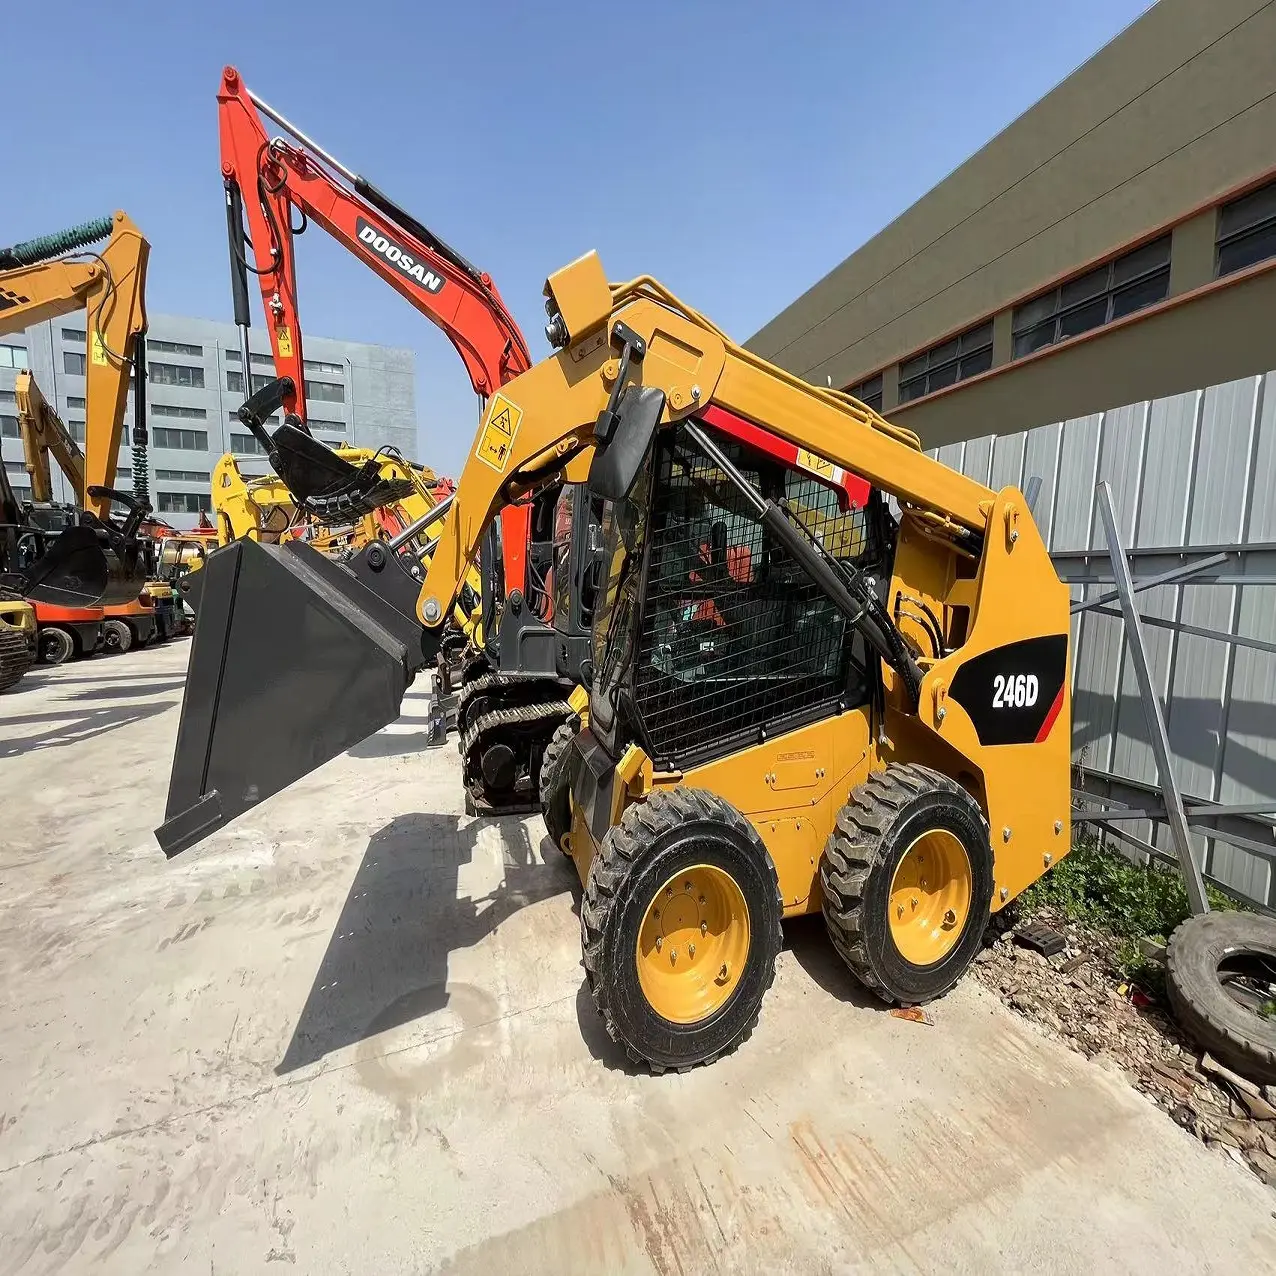 new arrival good quality used caterpillar 246d Skid Steer Loader used cat 246d skid steer loader machine for sale ready to ship